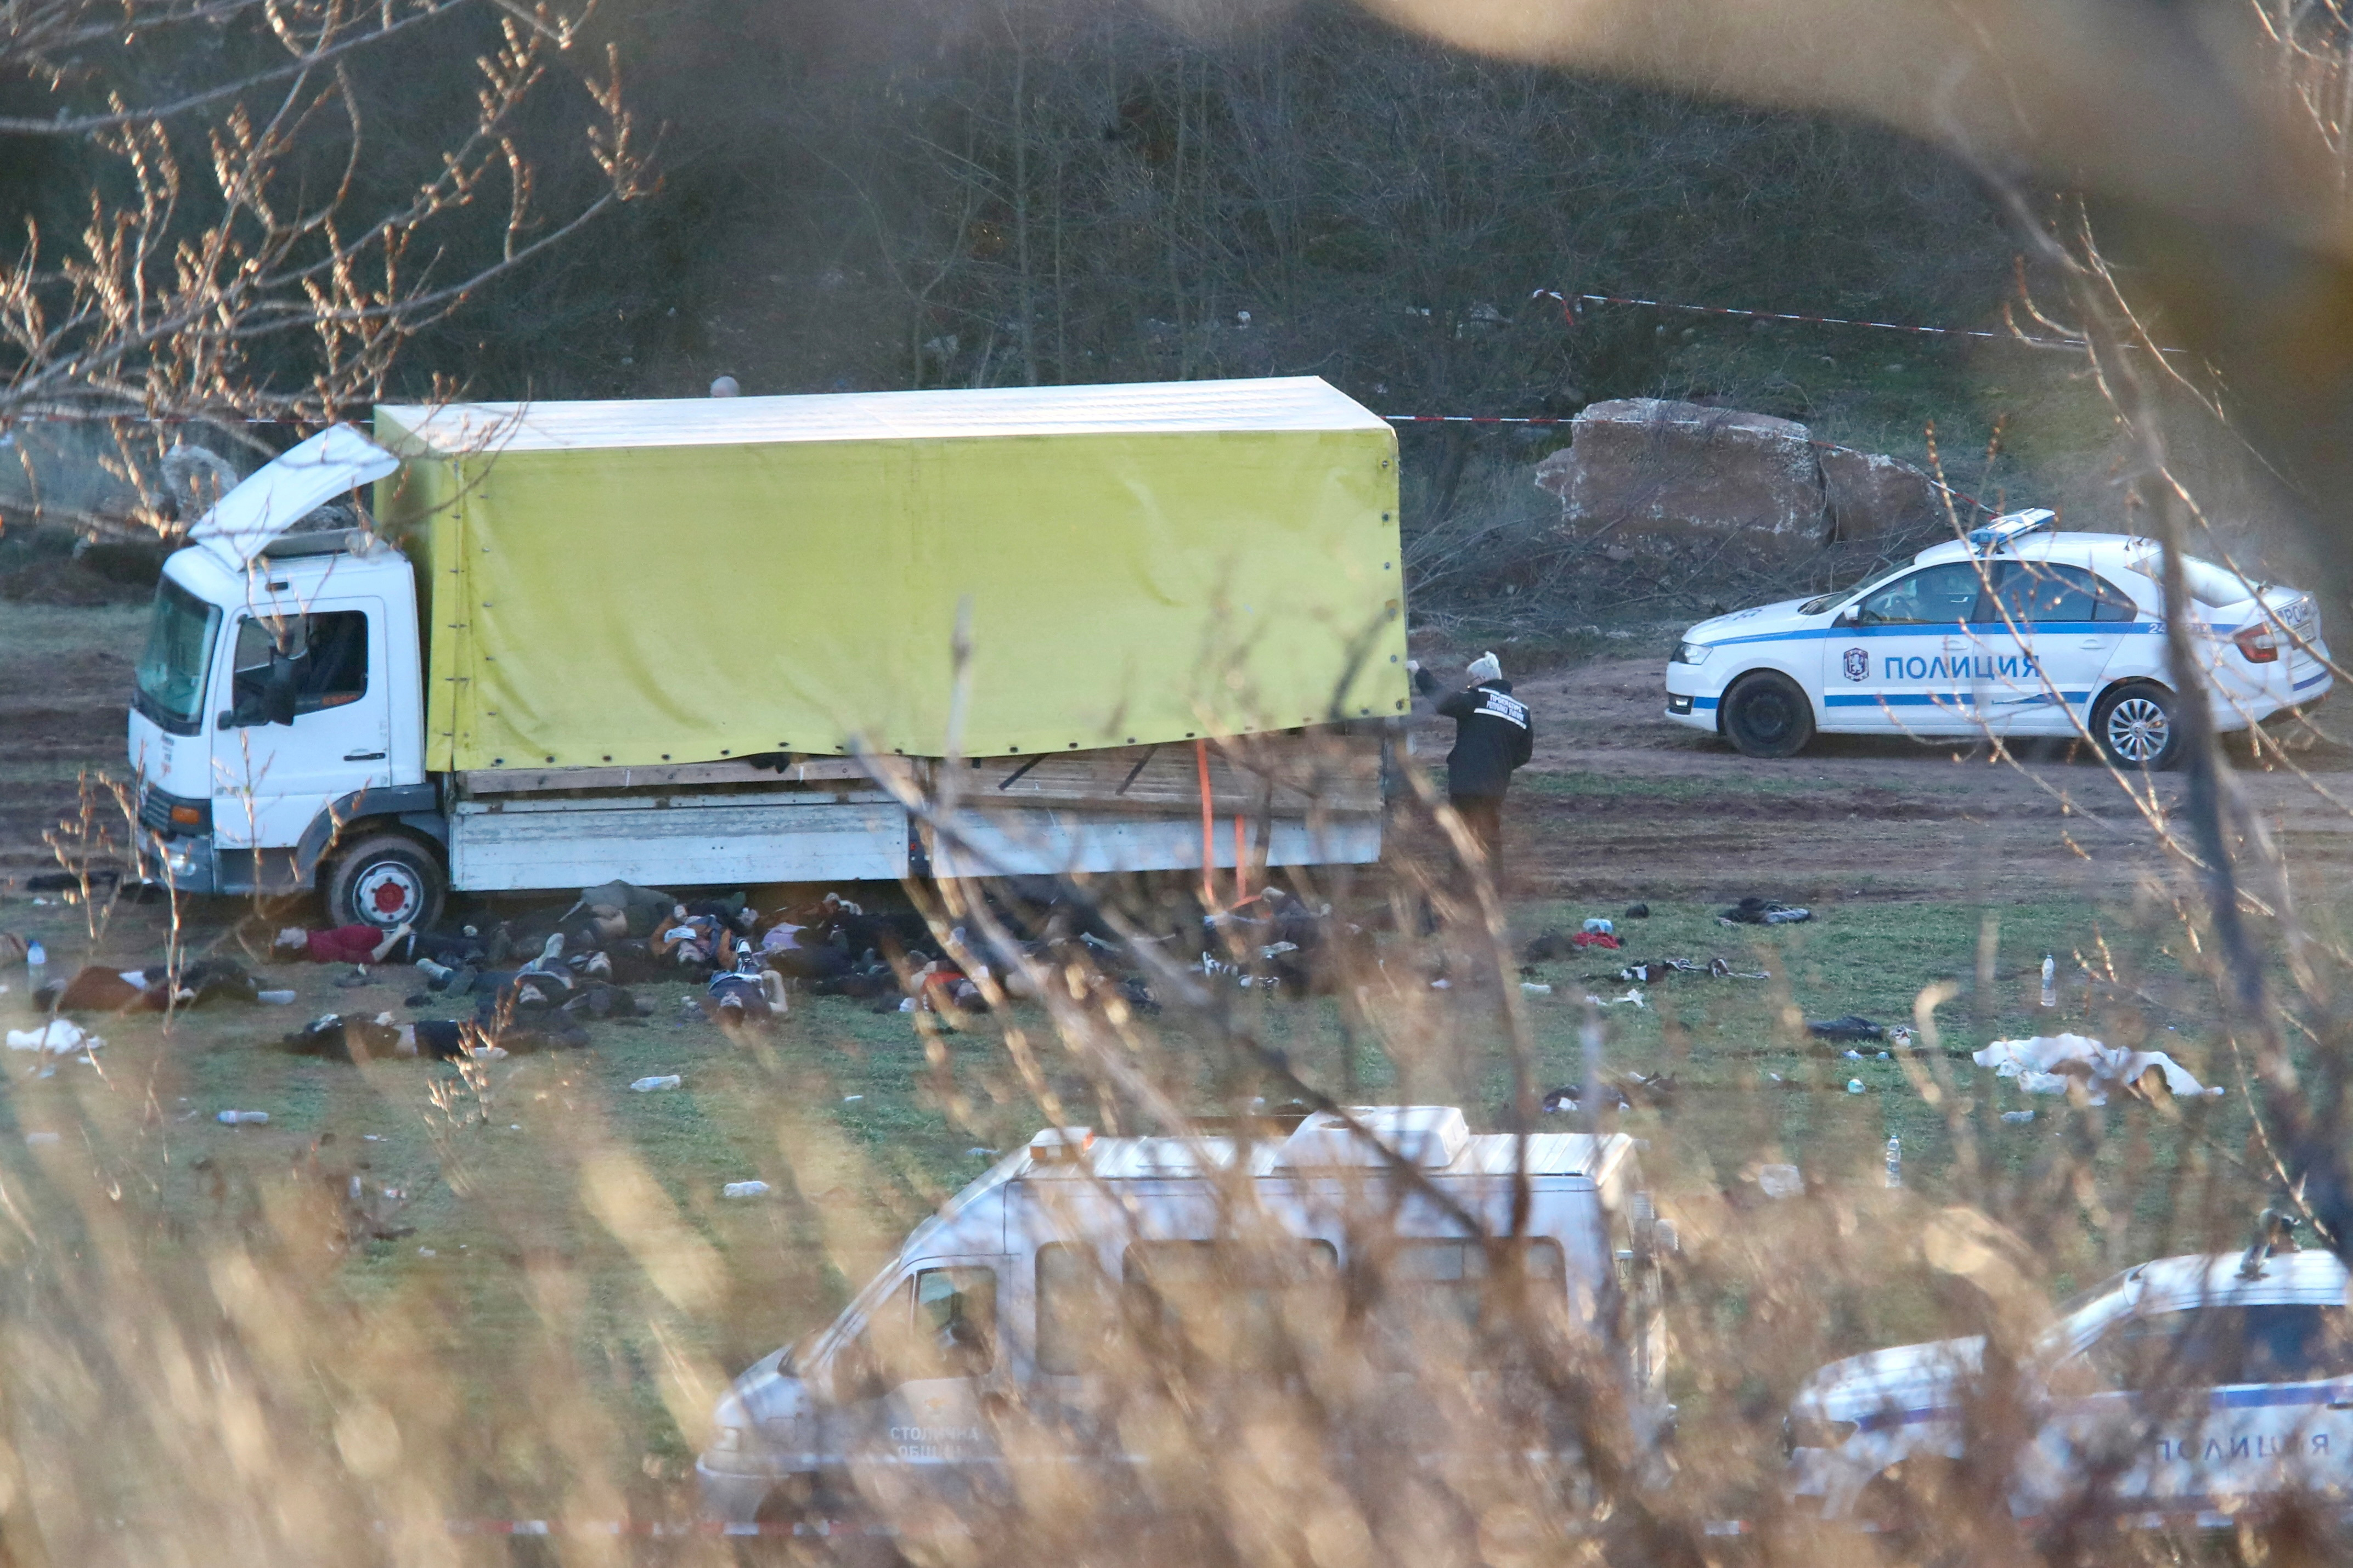 The bodies of migrants are seen next to a truck near Sofia